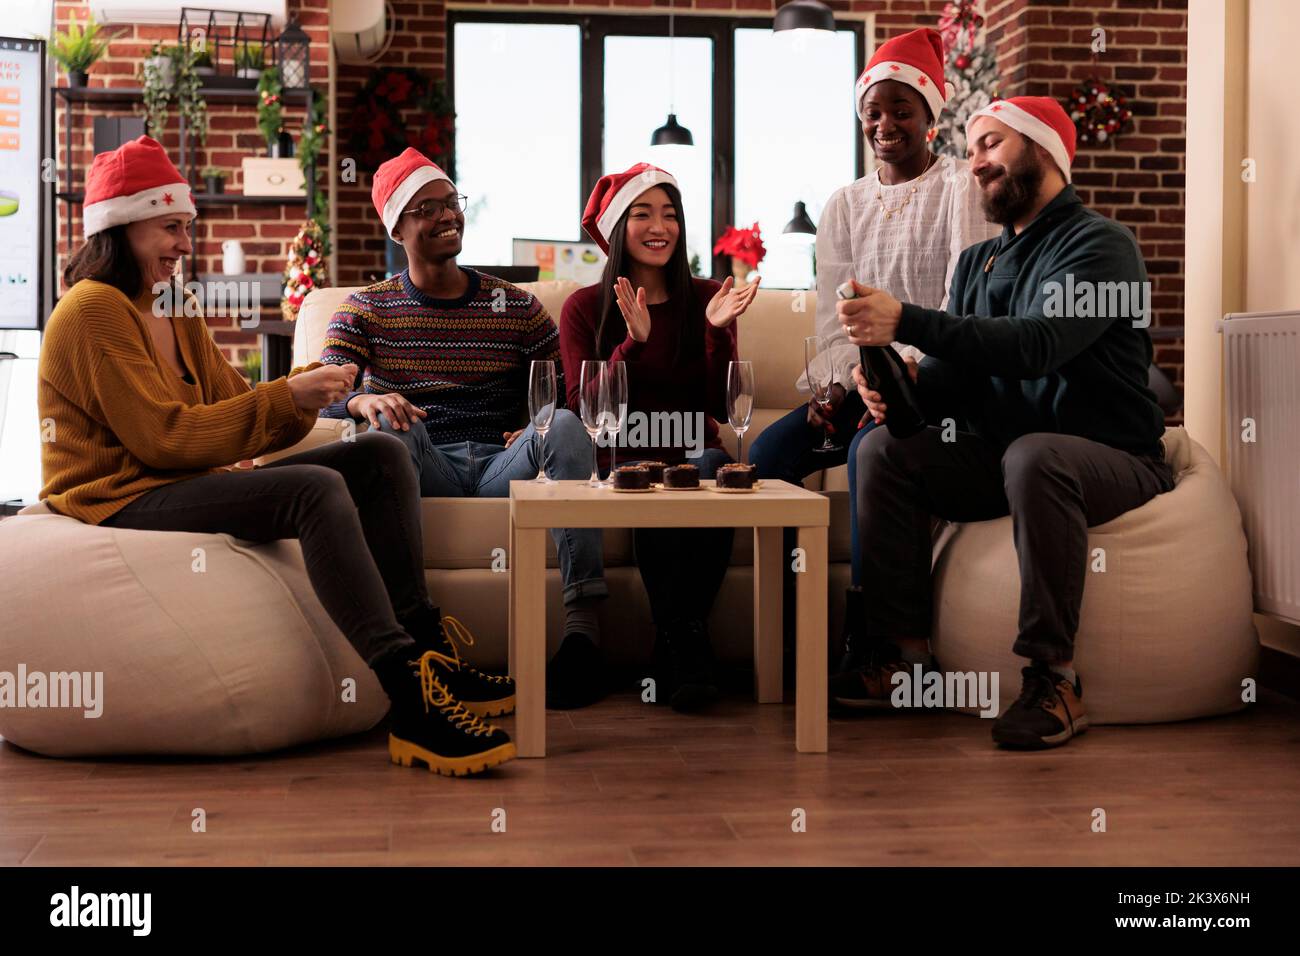 Diverse coworkers celebrating christmas at job party, drinking wine in glasses and having fun on winter holiday season. Festive office with xmas tree and seasonal decor, alcohol drink. Stock Photo